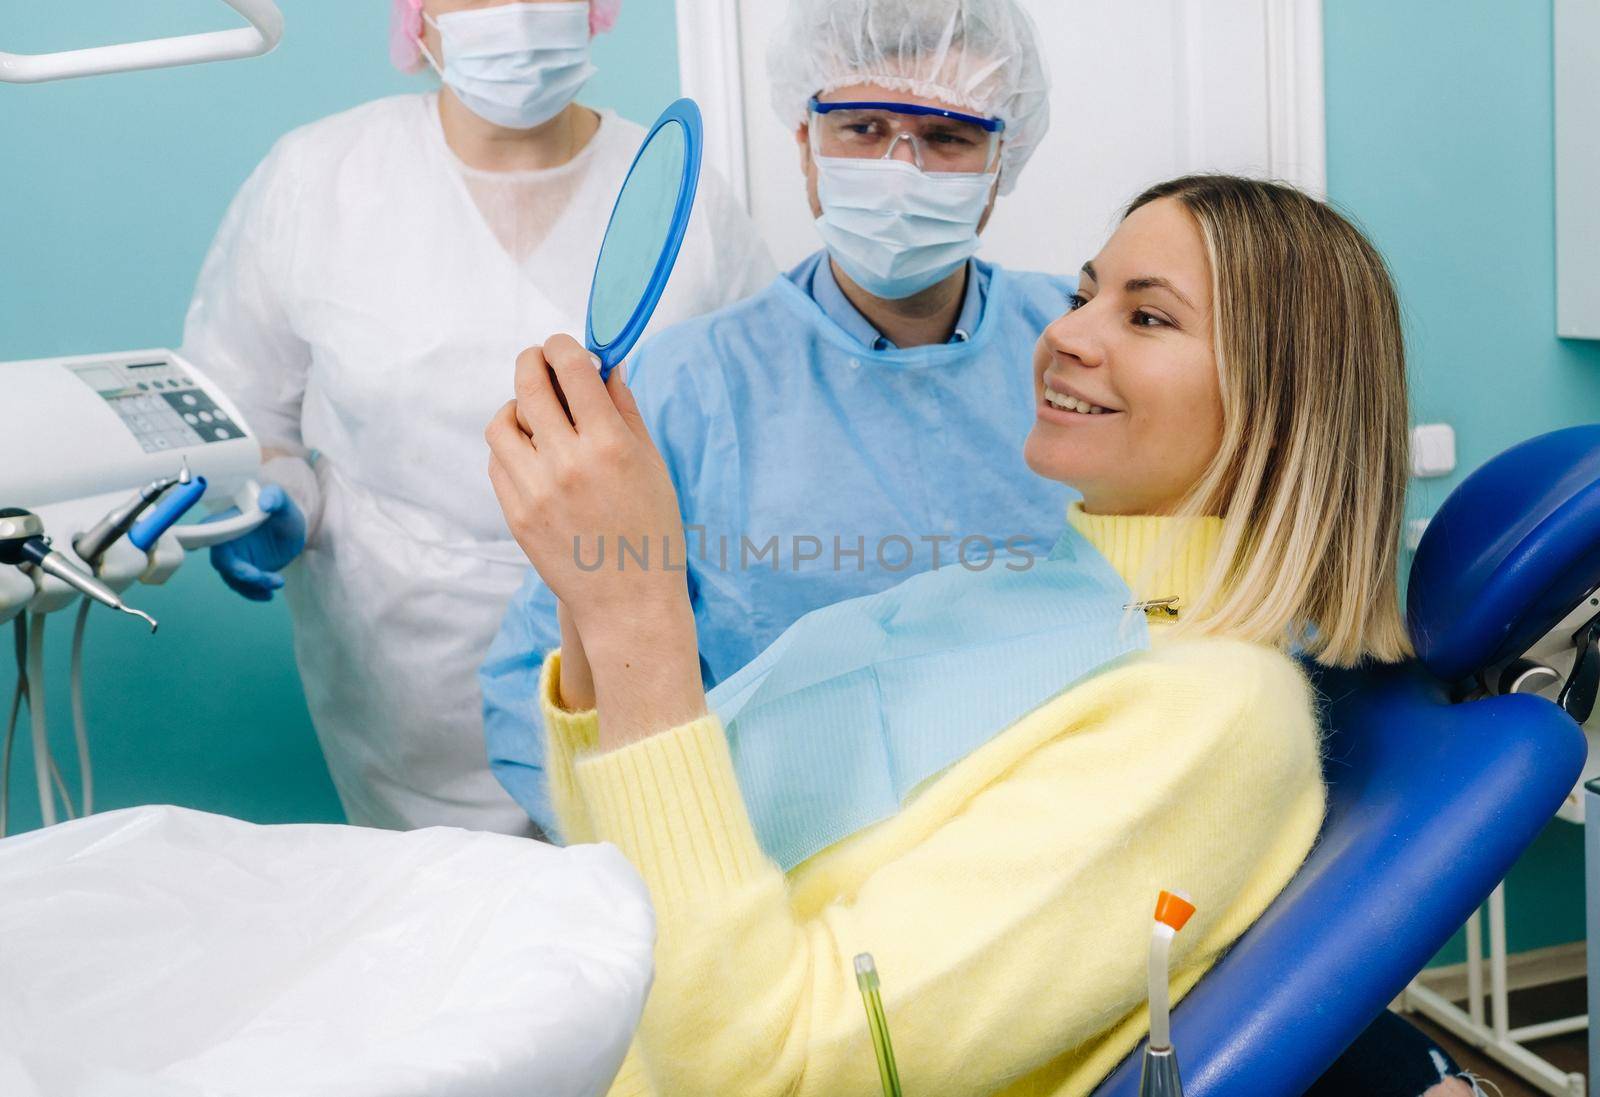 The dentist shows the client the results of his work in the mirror by Lobachad